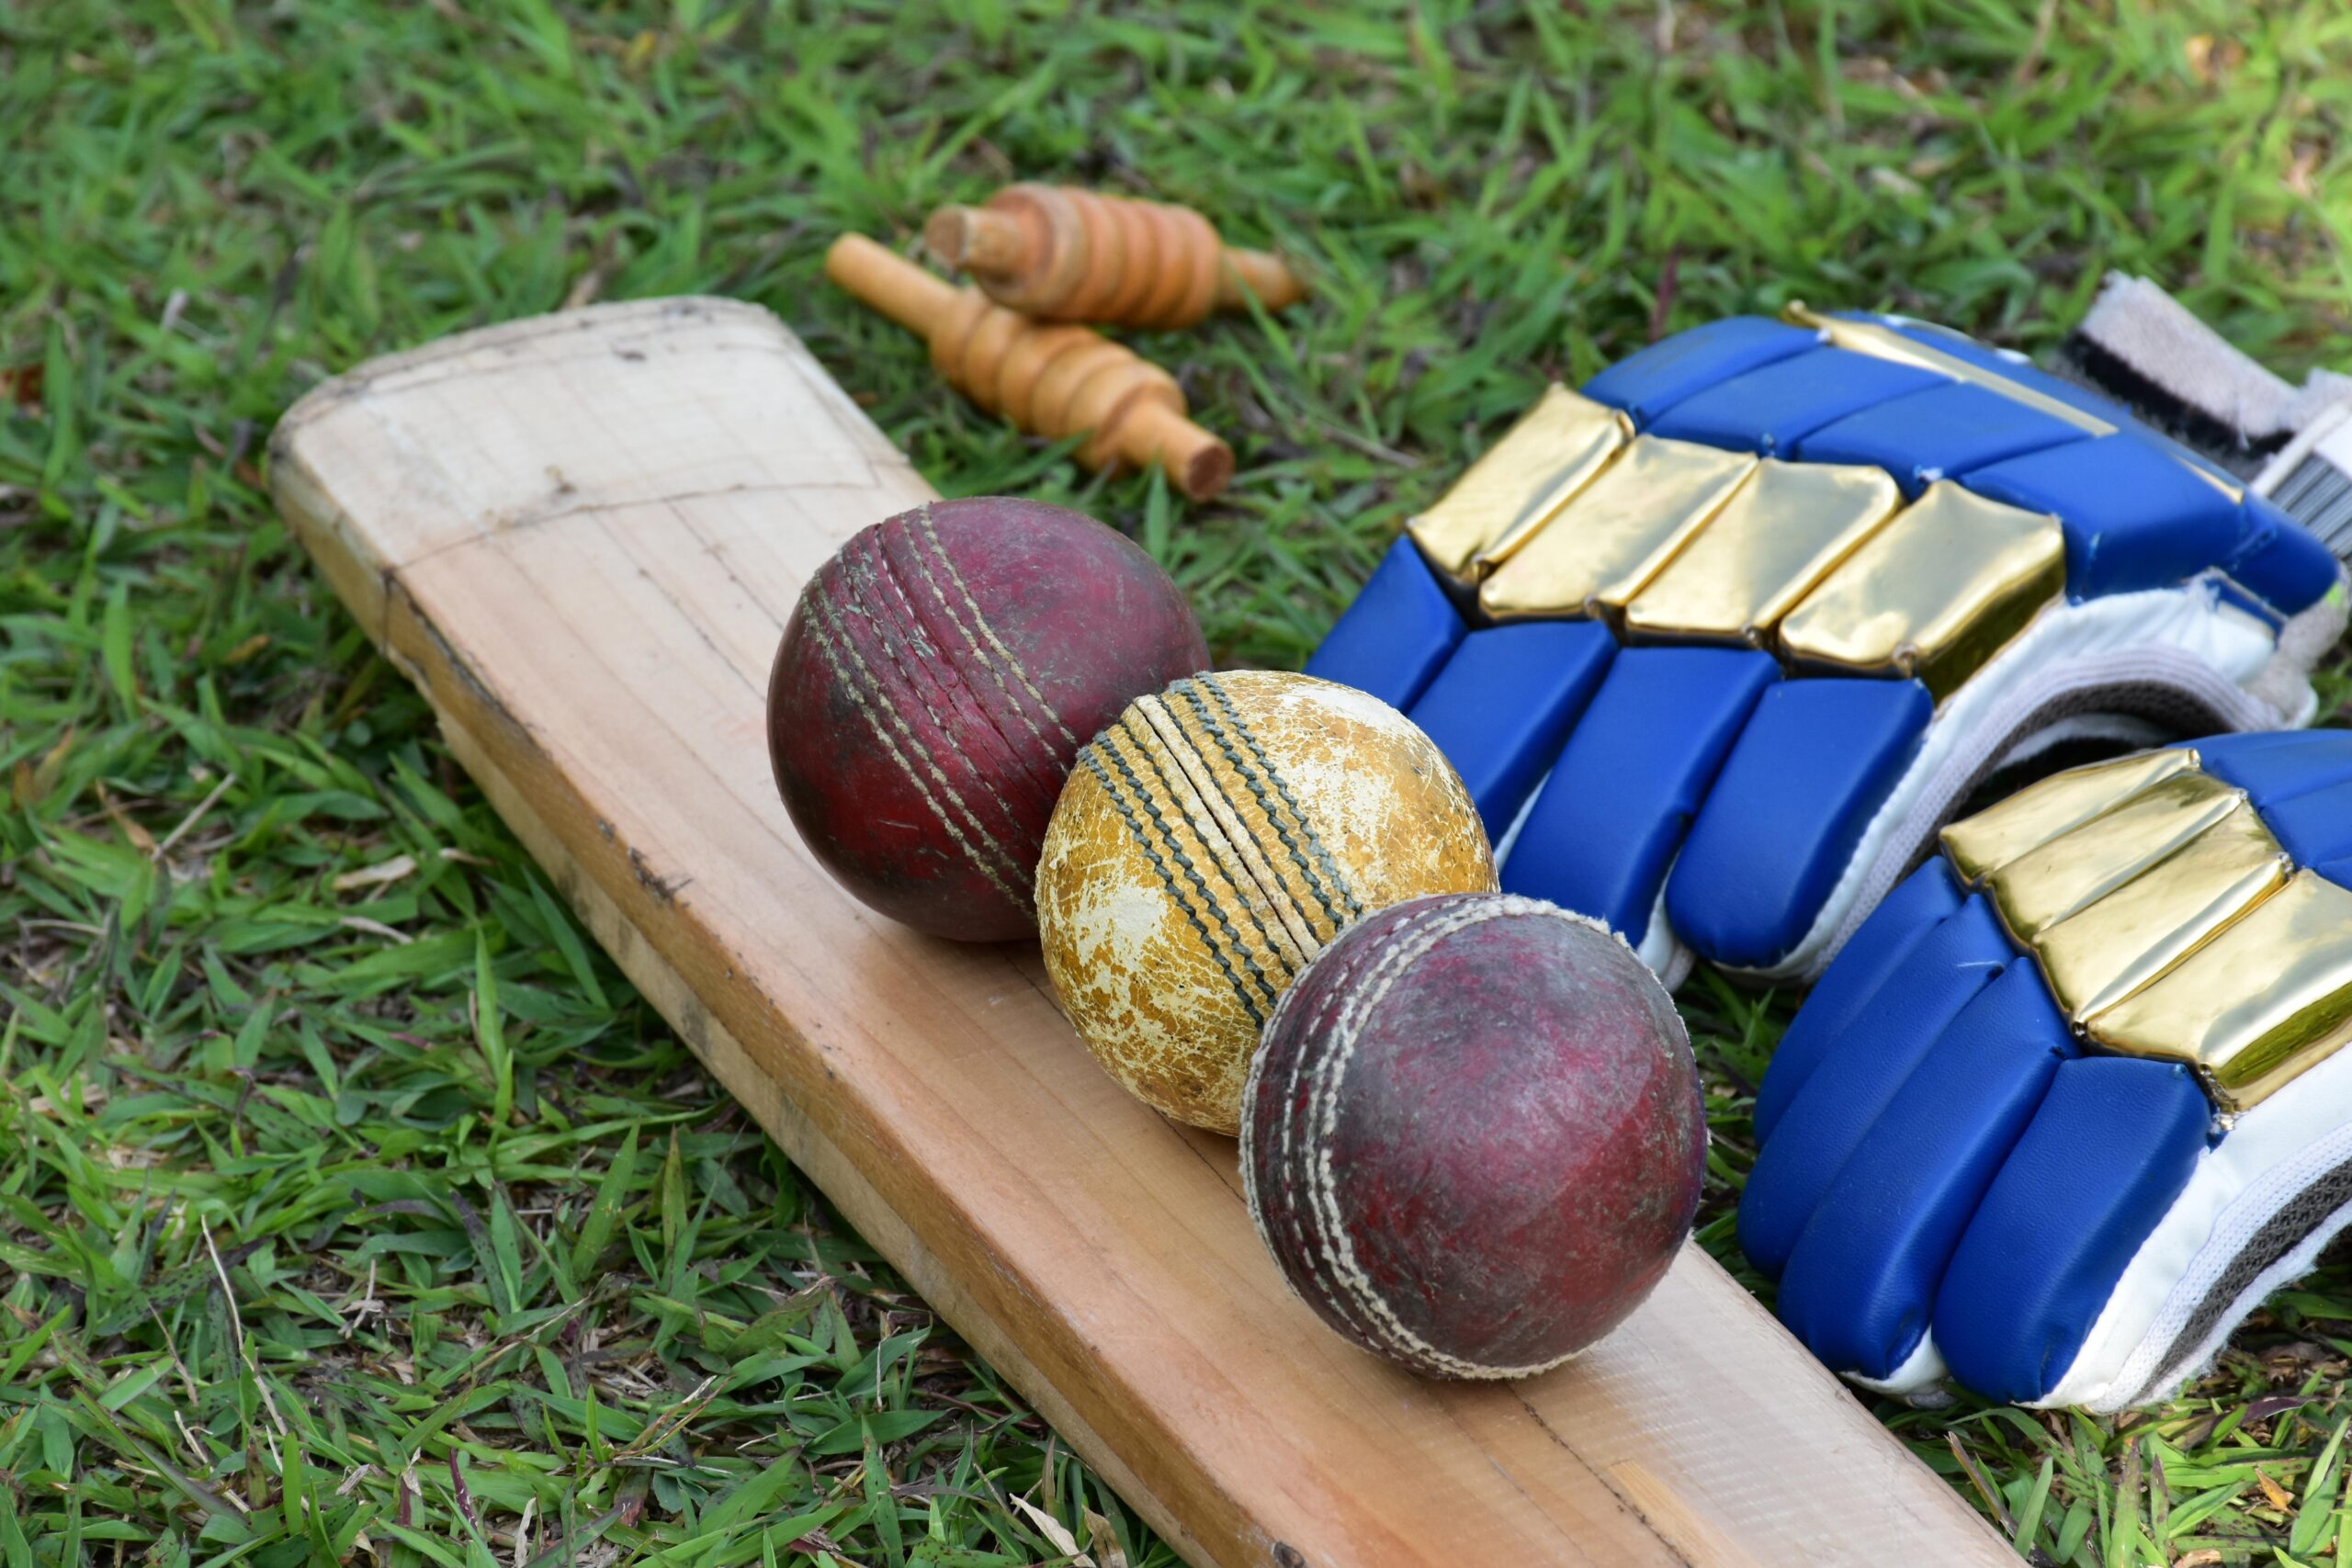 Cricket gear reuse project up and running in Surrey